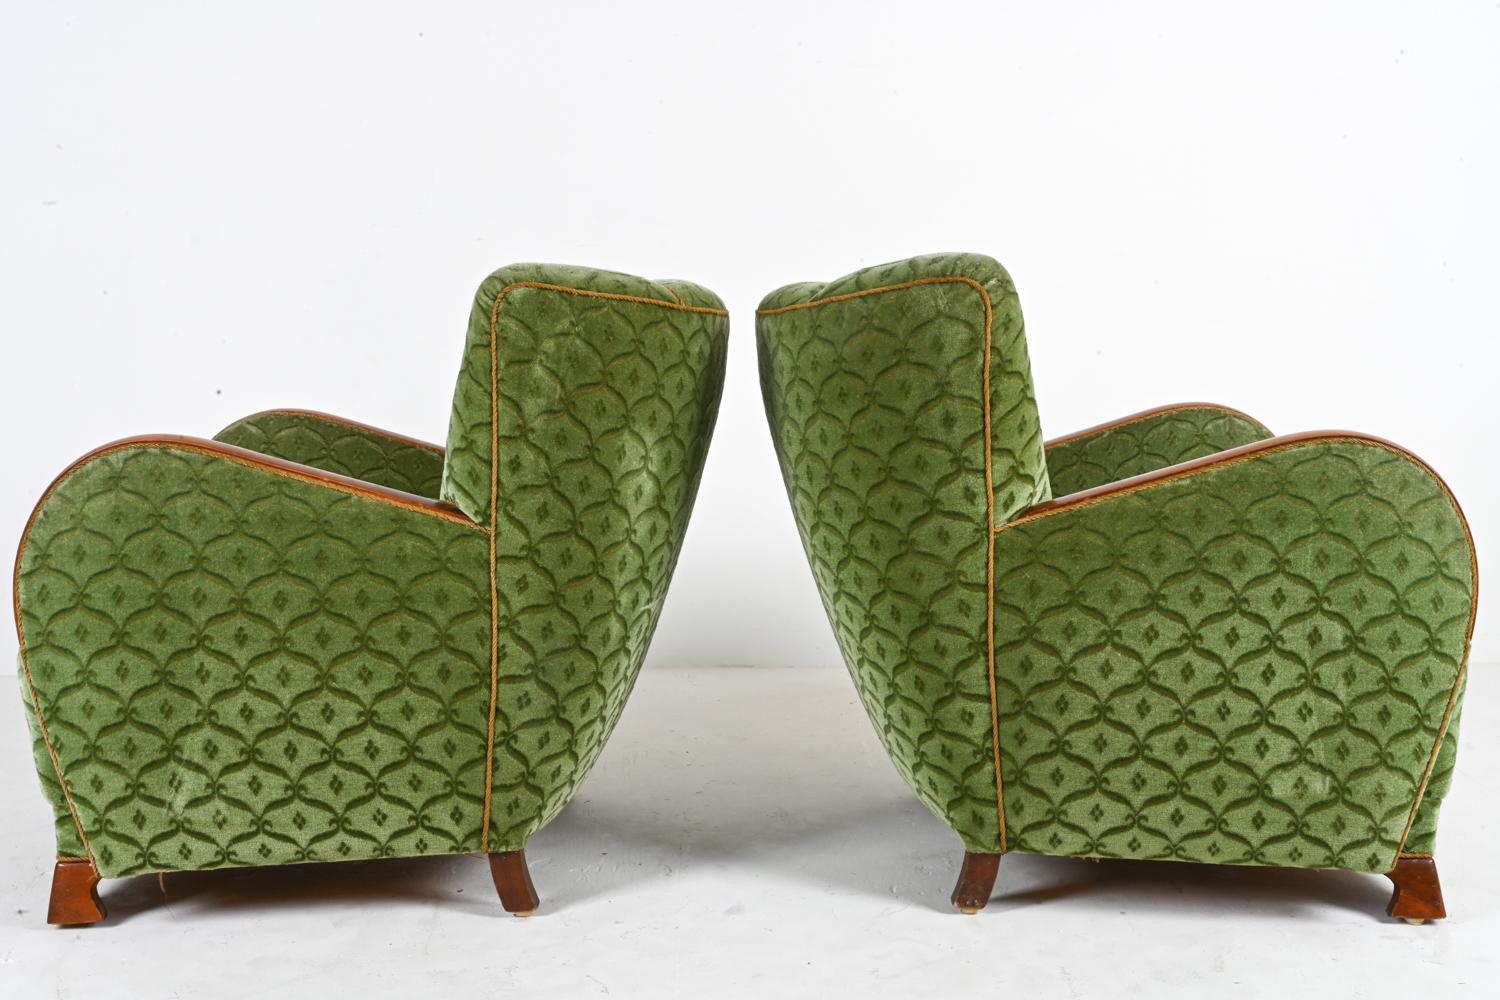 Pair of Mogens Lassen Style Danish Midcentury Lounge or Club Chairs, 1940s For Sale 6